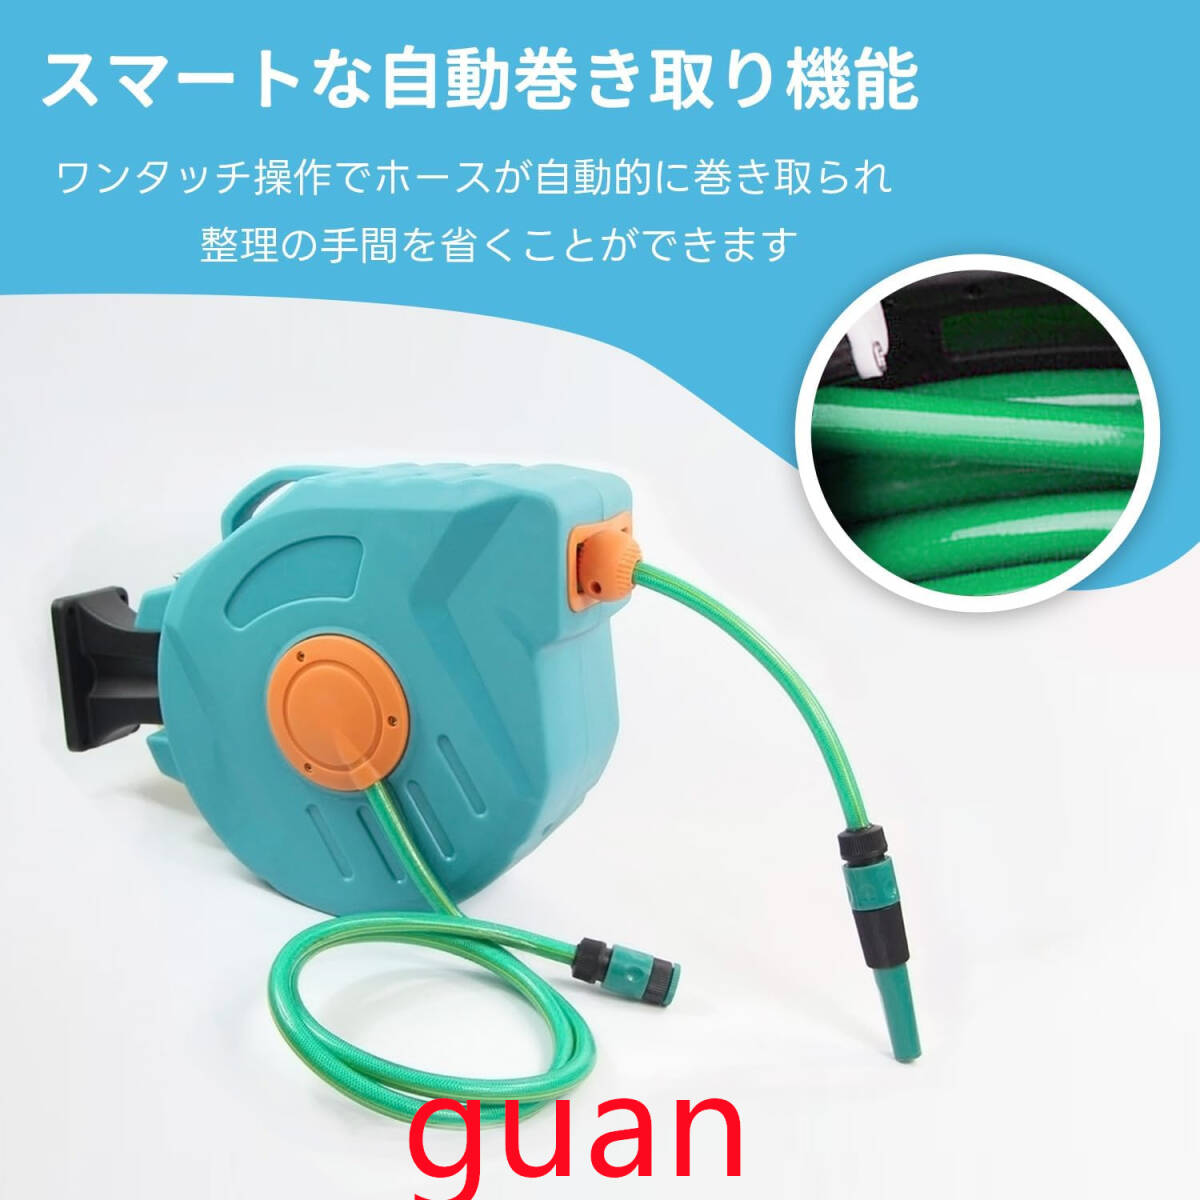  wall hanging / portable garden for (20m) hose reel self-winding watch return multifunction nozzle attaching hose reel 180° rotation bracket attaching wide range angle correspondence 